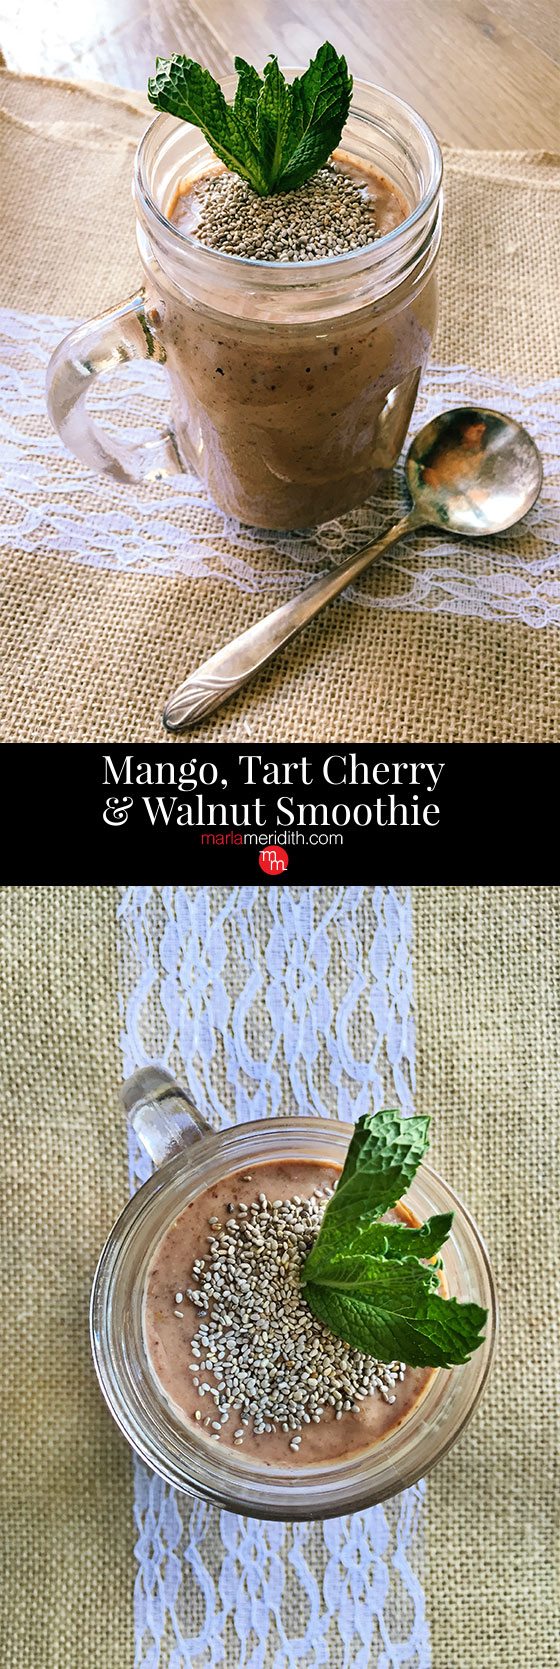 Mango, Tart Cherry & Walnut Smoothie a #vegan #recipe to enjoy any time of the day! MarlaMeridith.com ( @marlameridith )